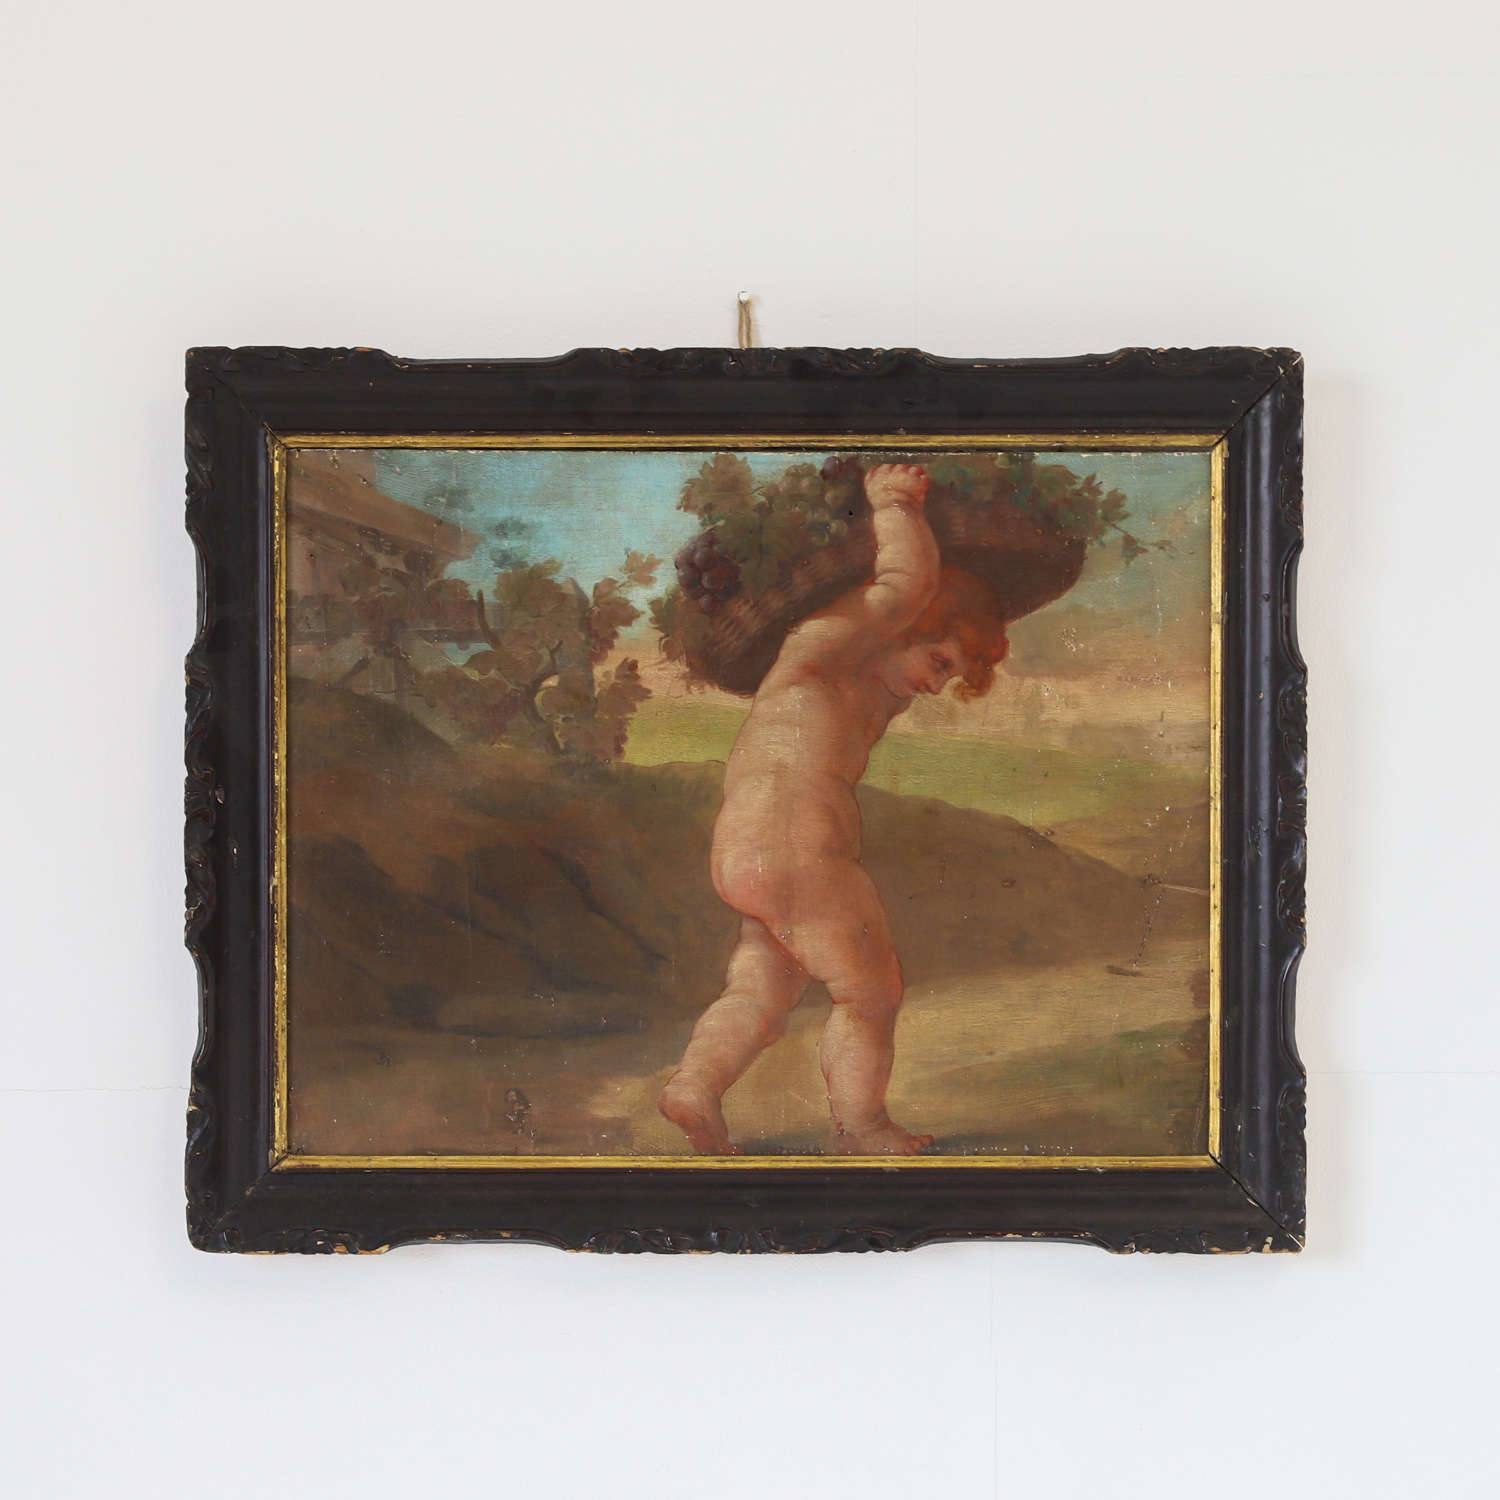 Oil on Canvas Painting of Putti Carrying Grapes